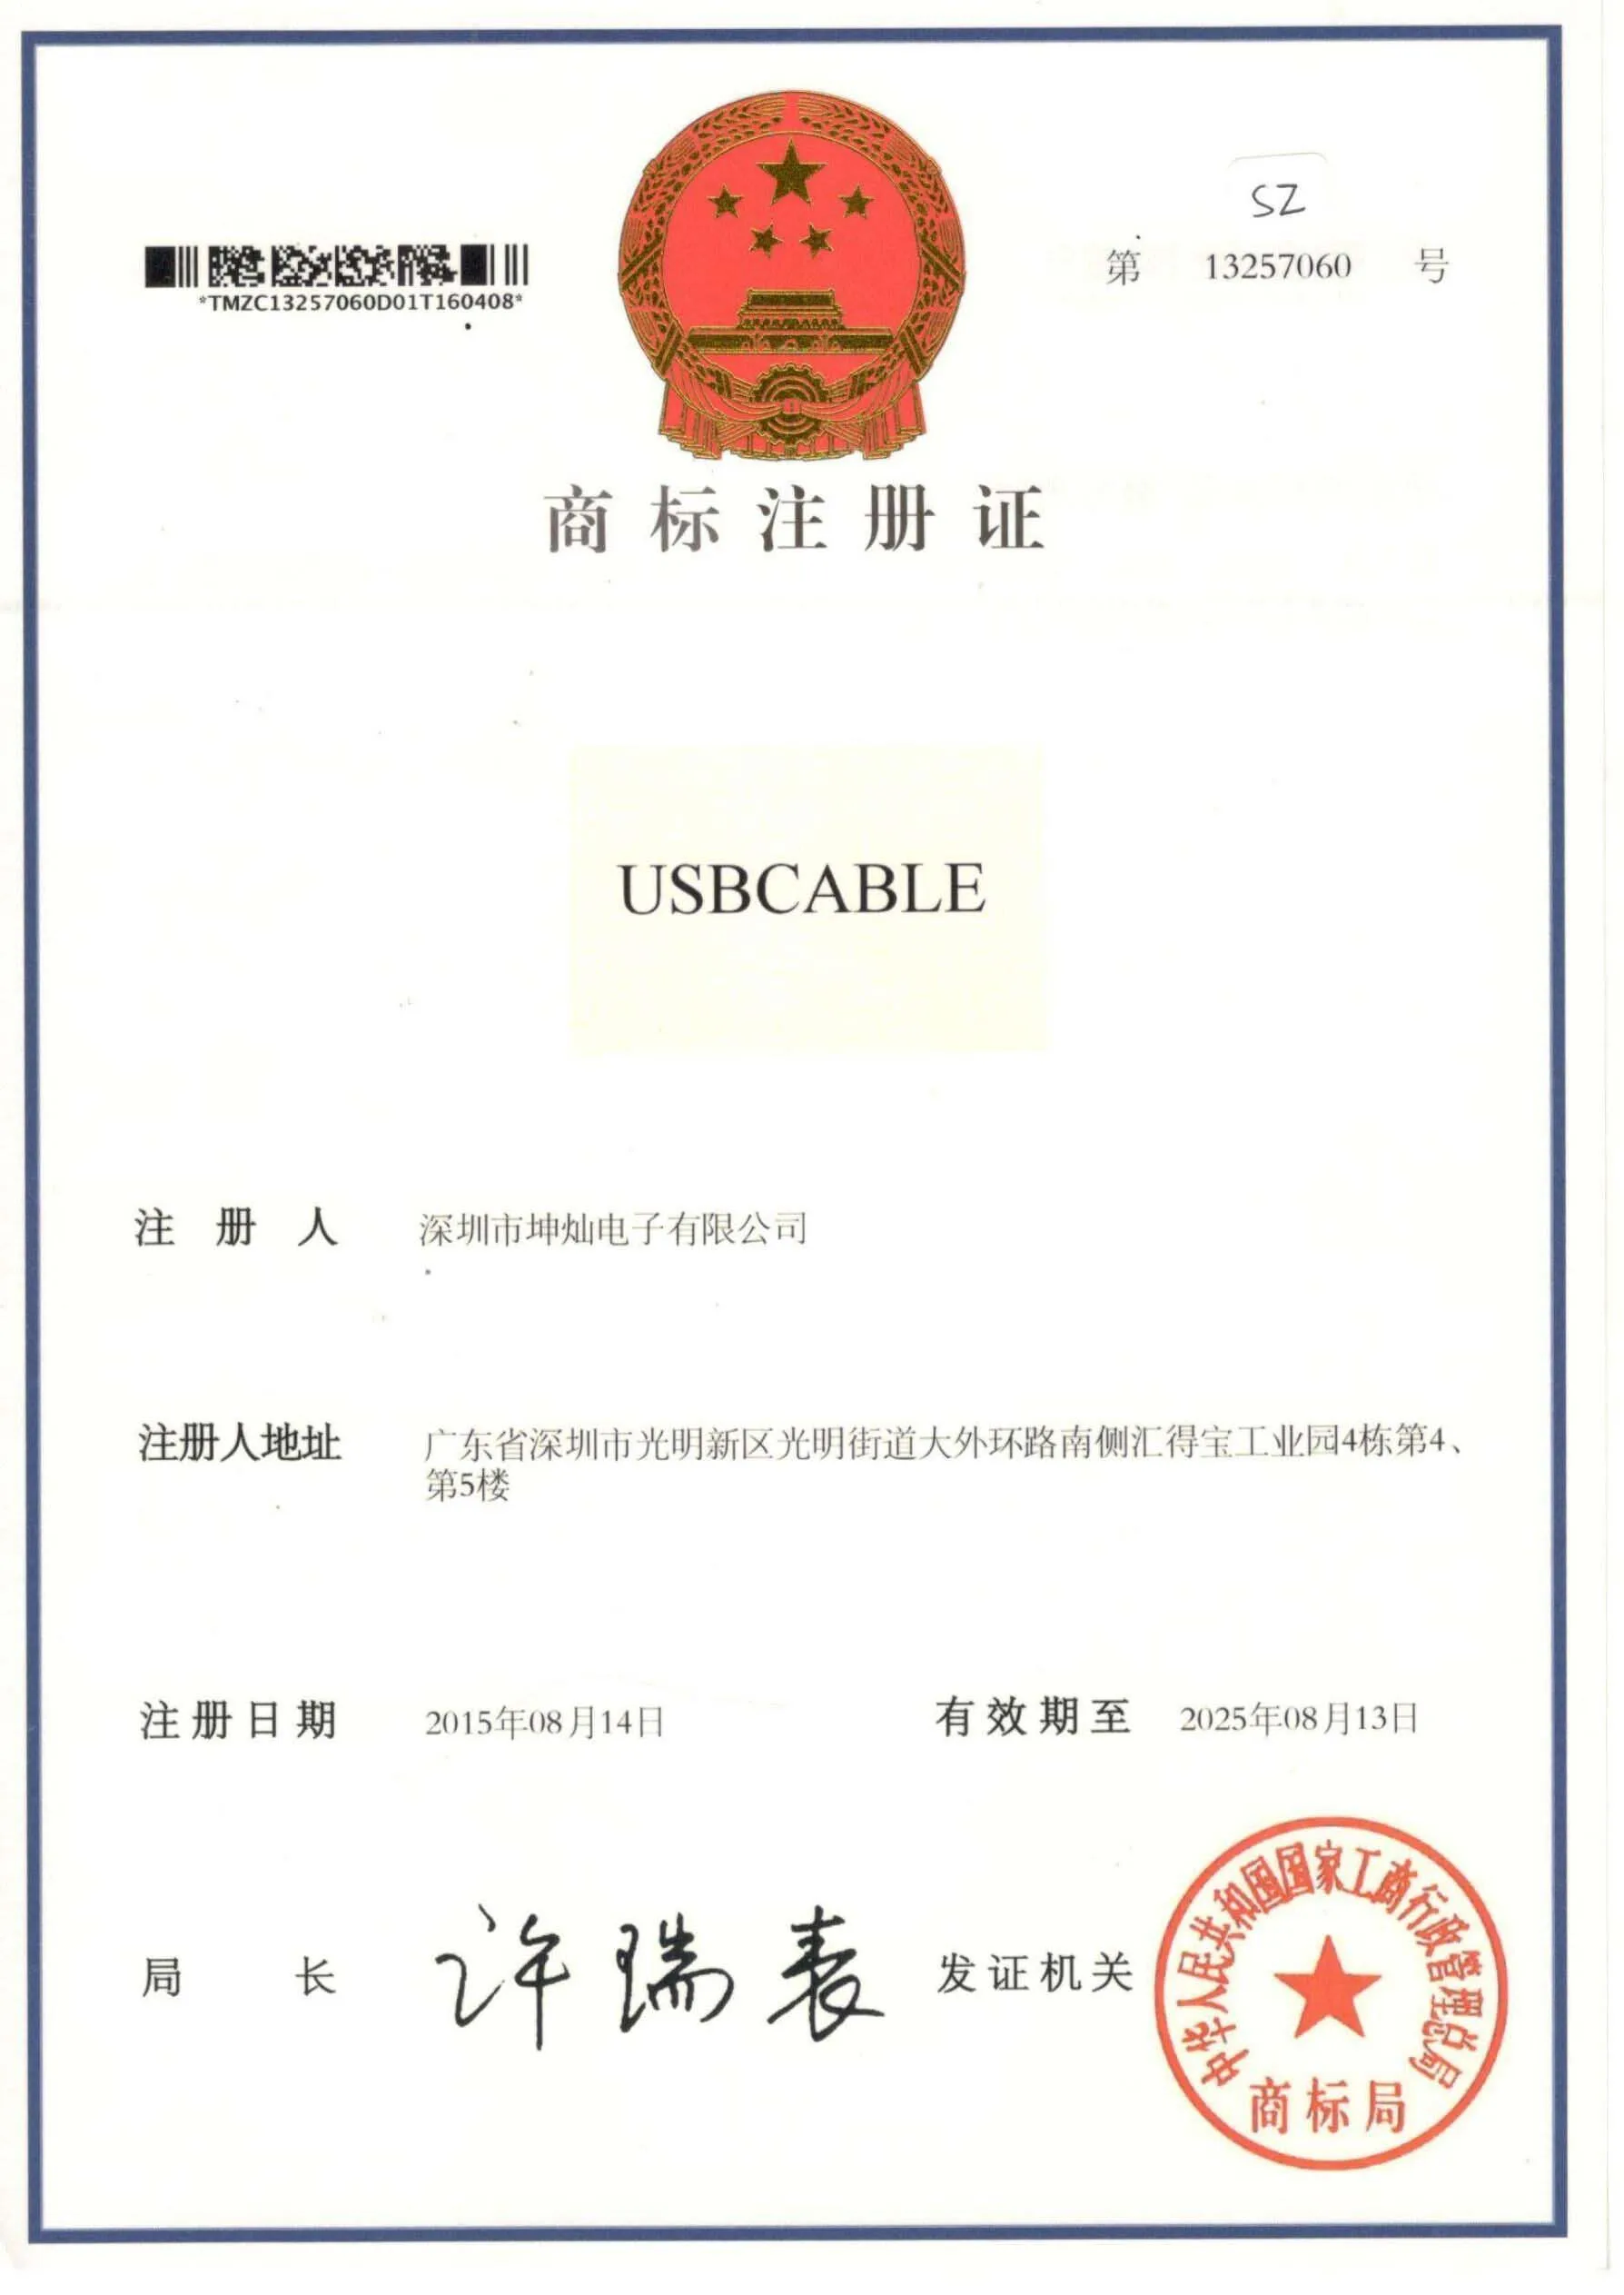 USBCABLE